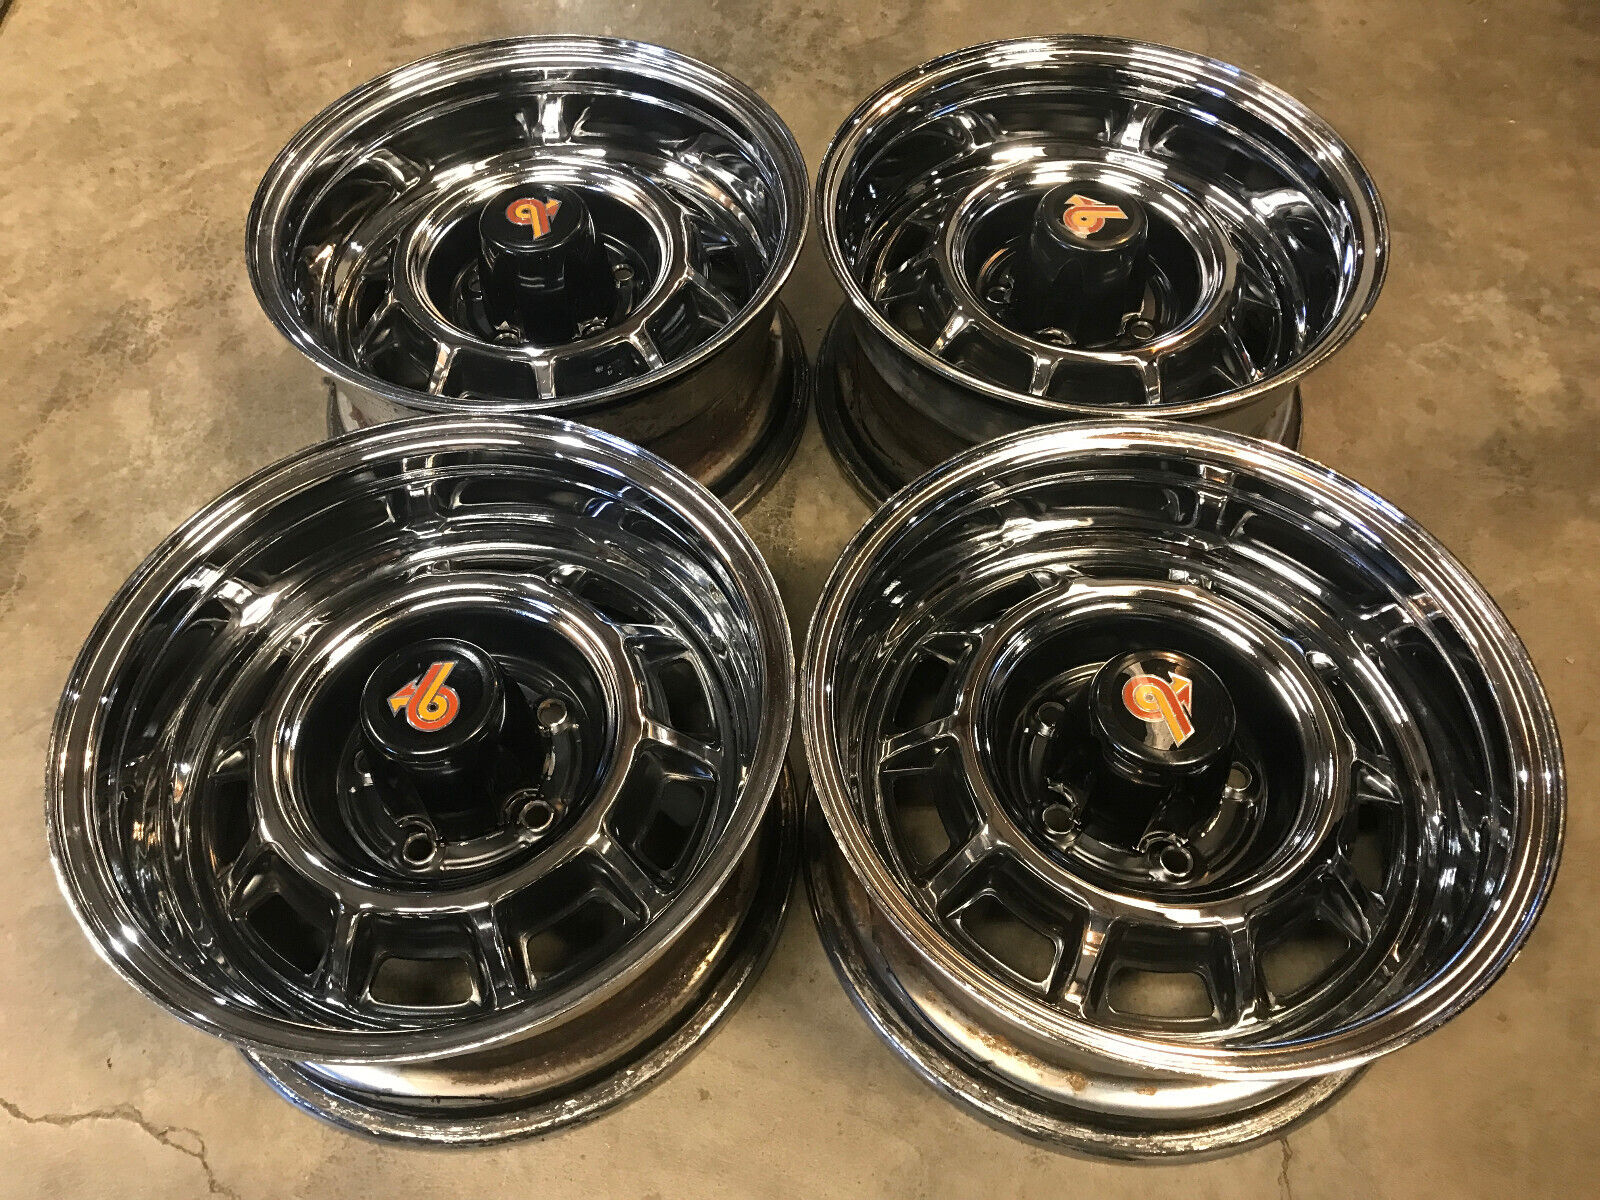 Buick Grand National Factory Chrome Wheels and Caps 15x7